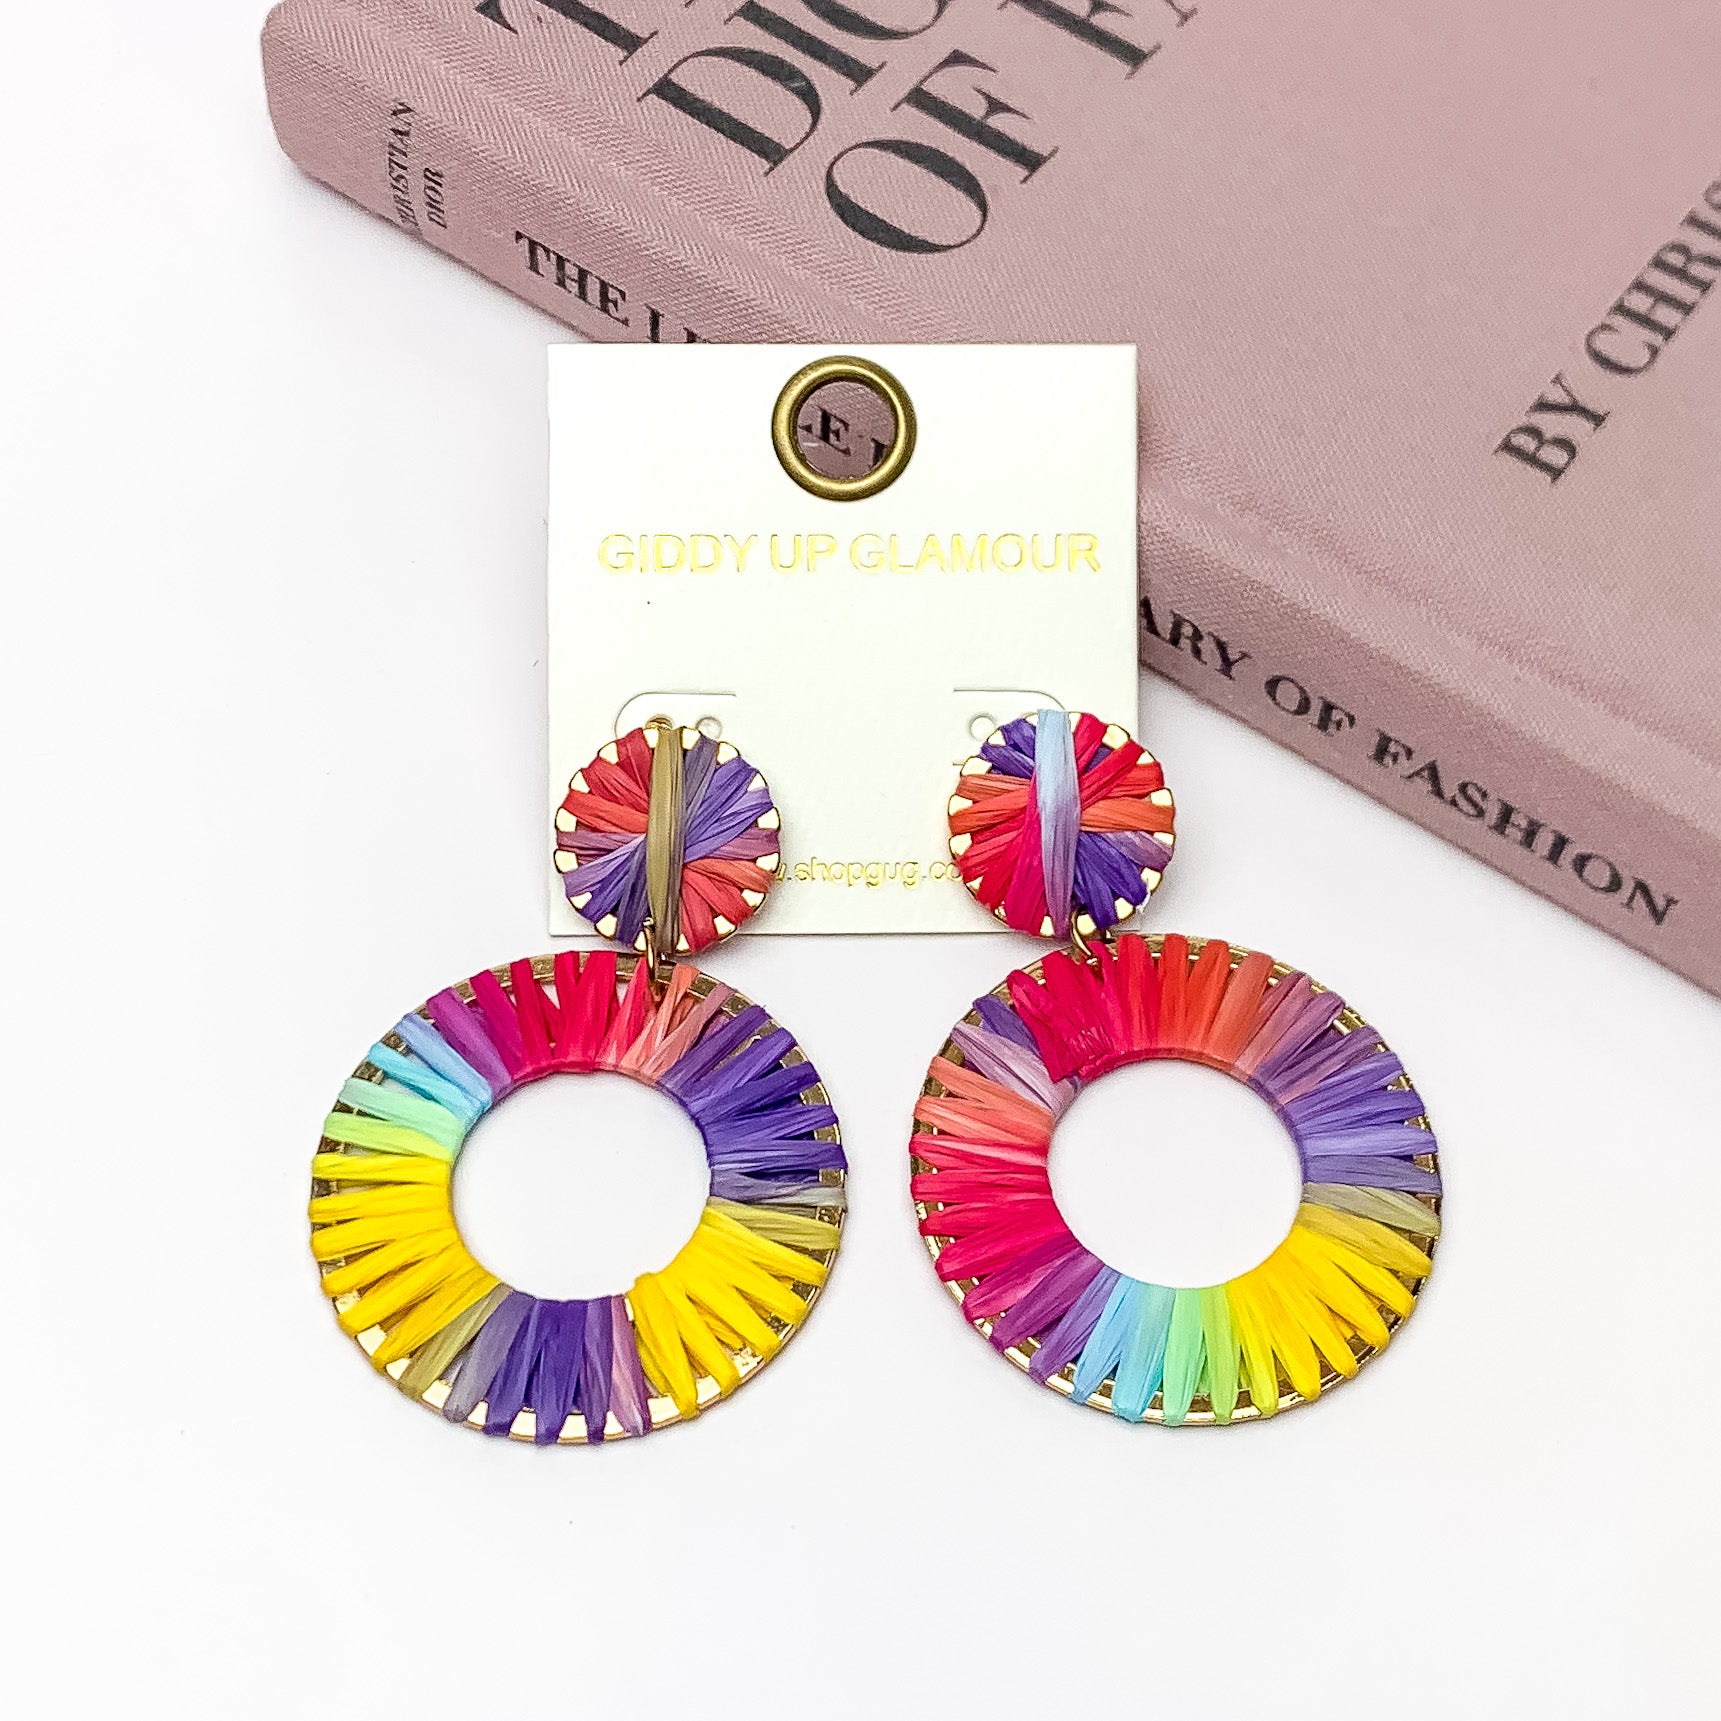 Rainbow Sunshine Open Circle Earrings in Multicolor. Pictured on a white background with a book in the top right corner.